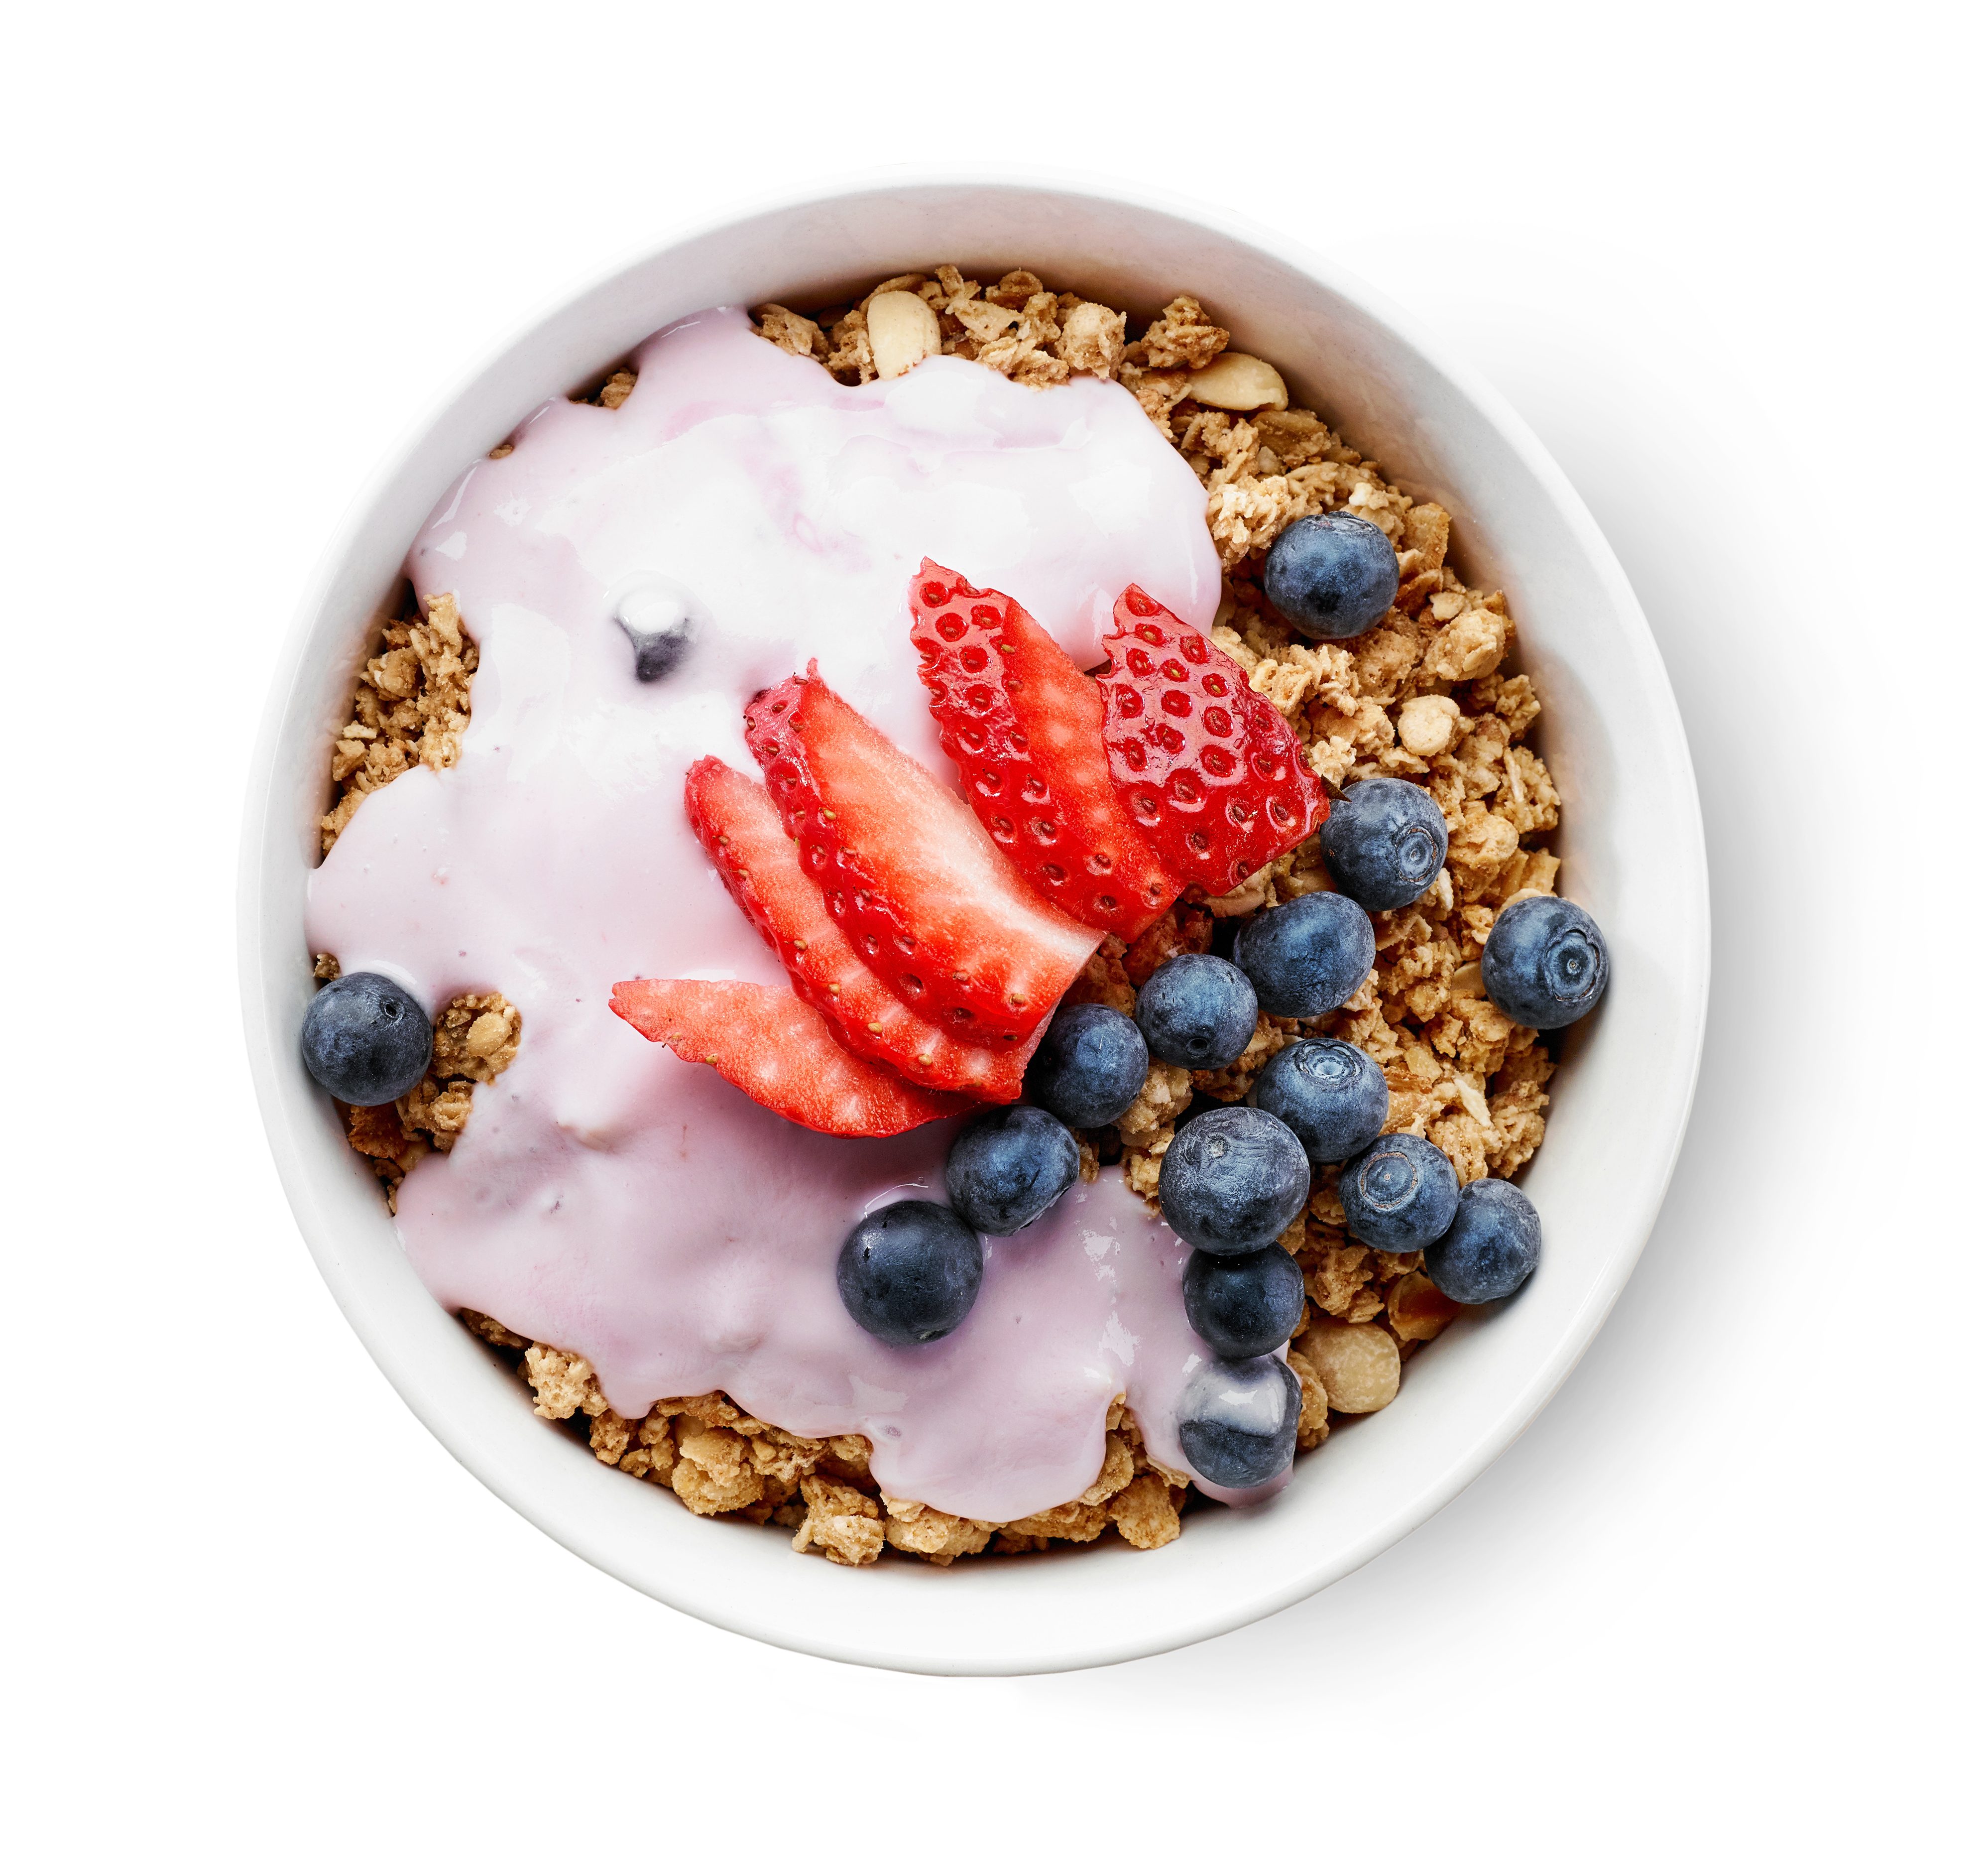 https://www.tasteofhome.com/wp-content/uploads/2020/02/bowl-of-granola-with-yogurt-and-berries-GettyImages-515437512.jpg?fit=700%2C655